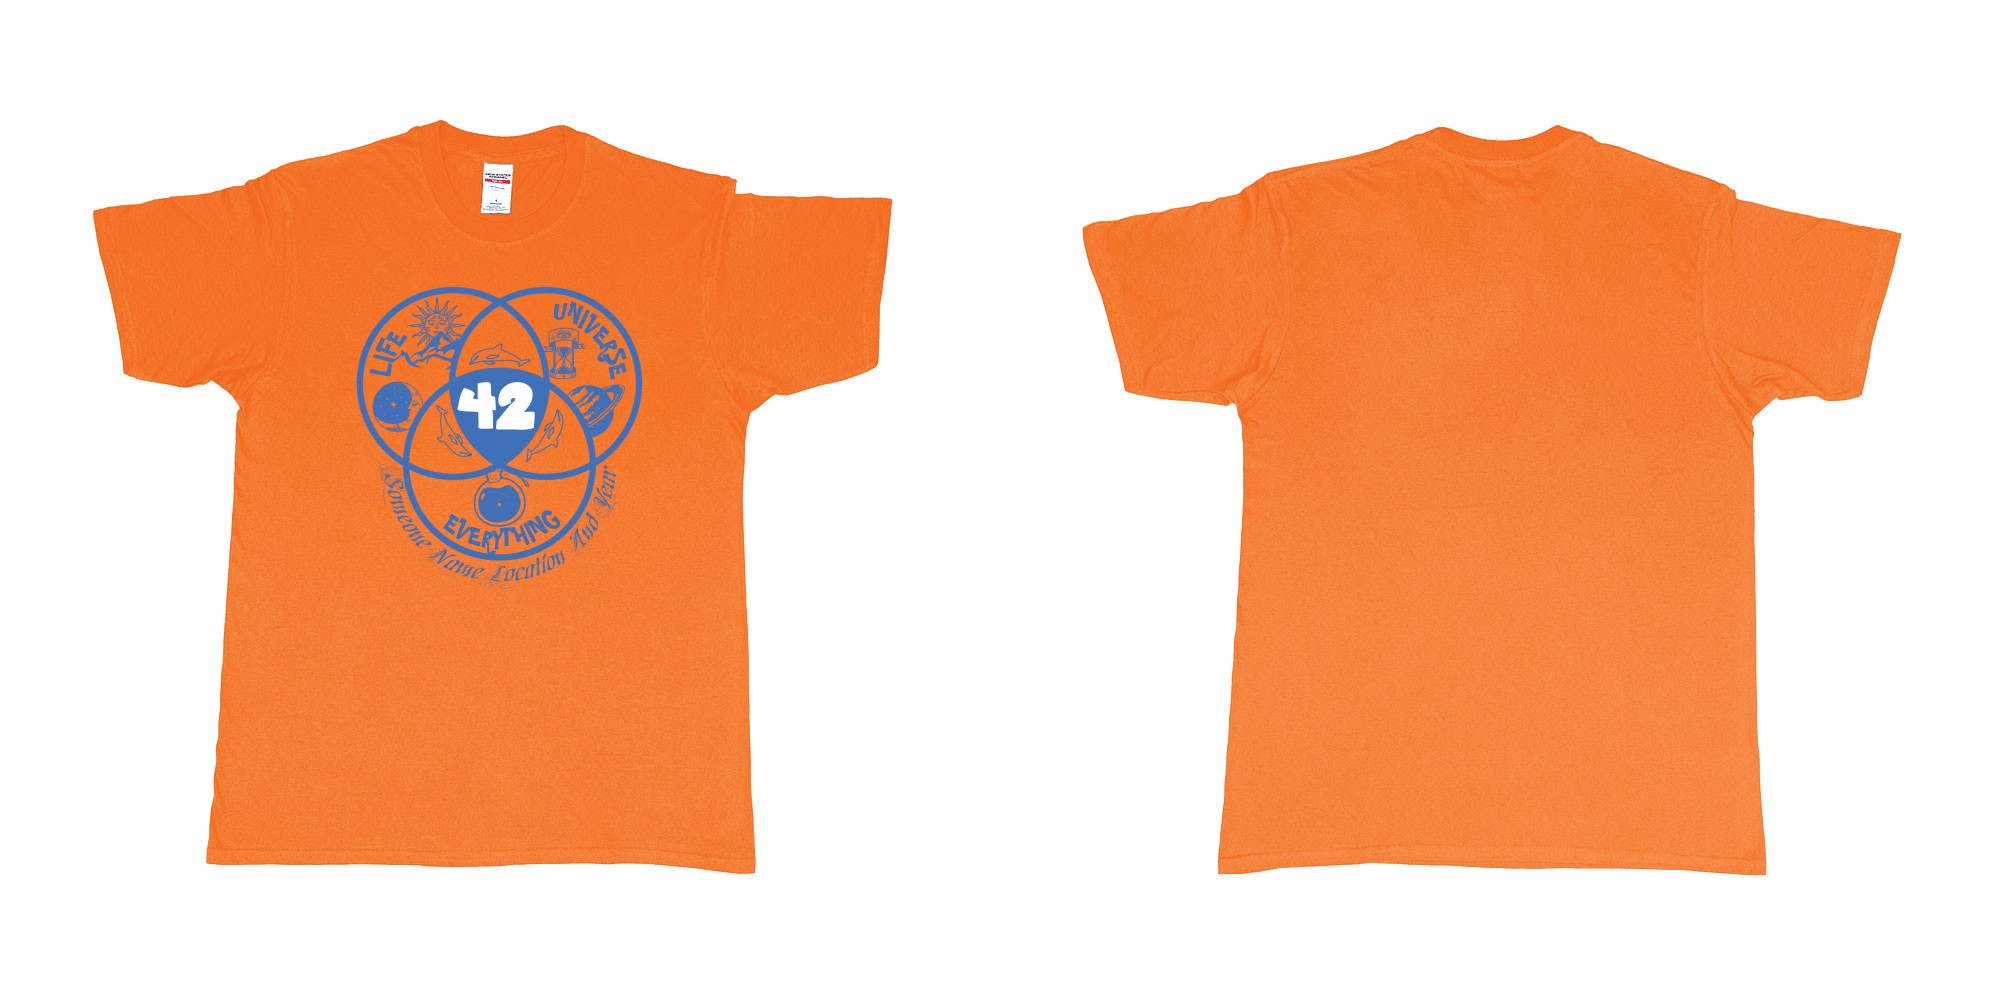 Custom tshirt design 42 everything in fabric color orange choice your own text made in Bali by The Pirate Way